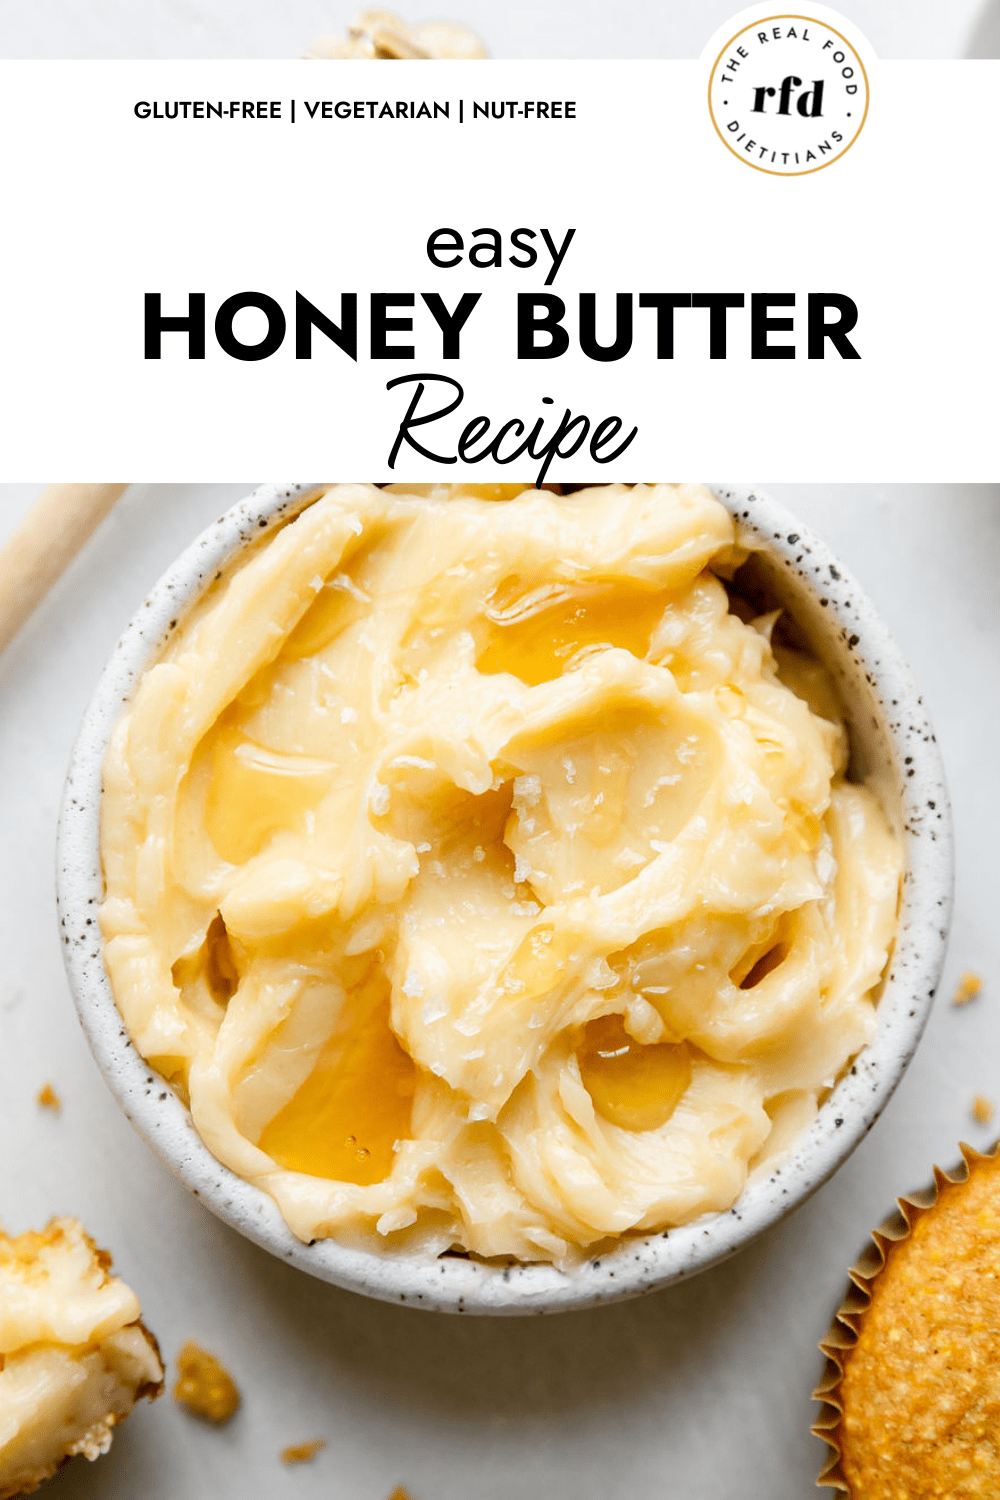 Homemade Cinnamon Honey Butter - Oh My Food Recipes